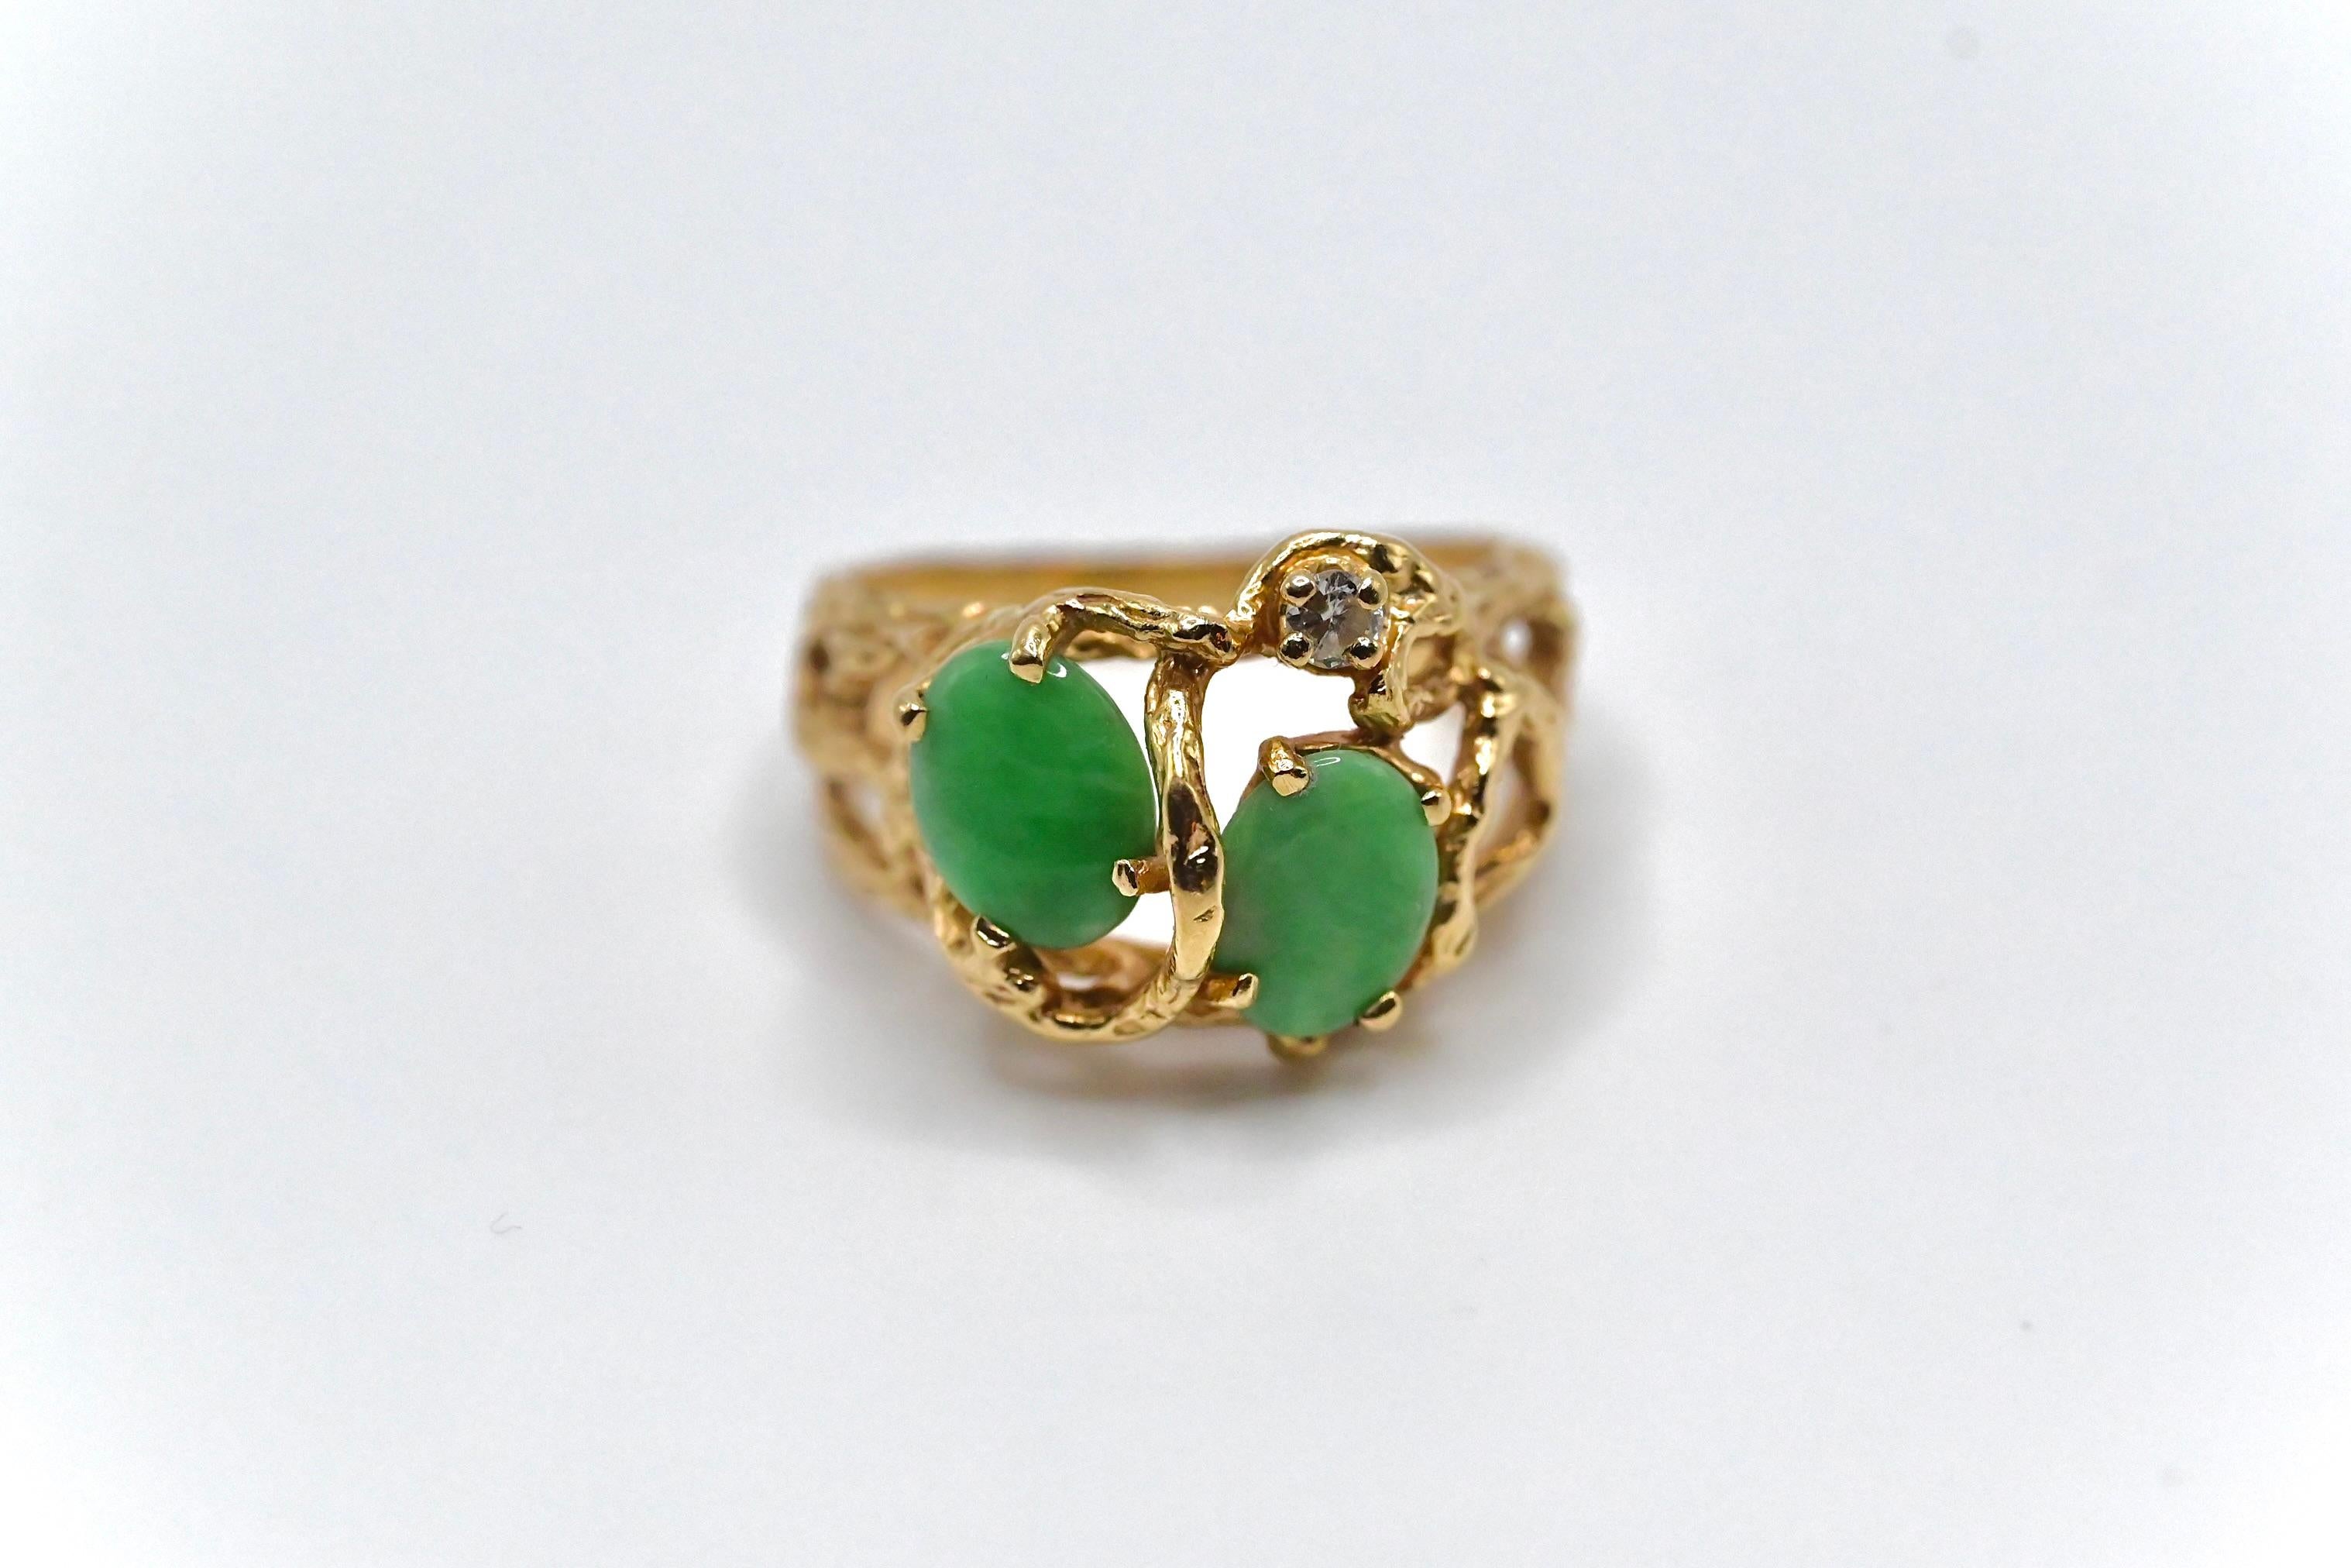 This is a unique 14K yellow gold ring made with oval shaped high quality jade, and a single fine diamond all abstractly placed. The ring is a size 7, and weighs about 5 grams. It’s in beautiful condition with little wear, and if you have any